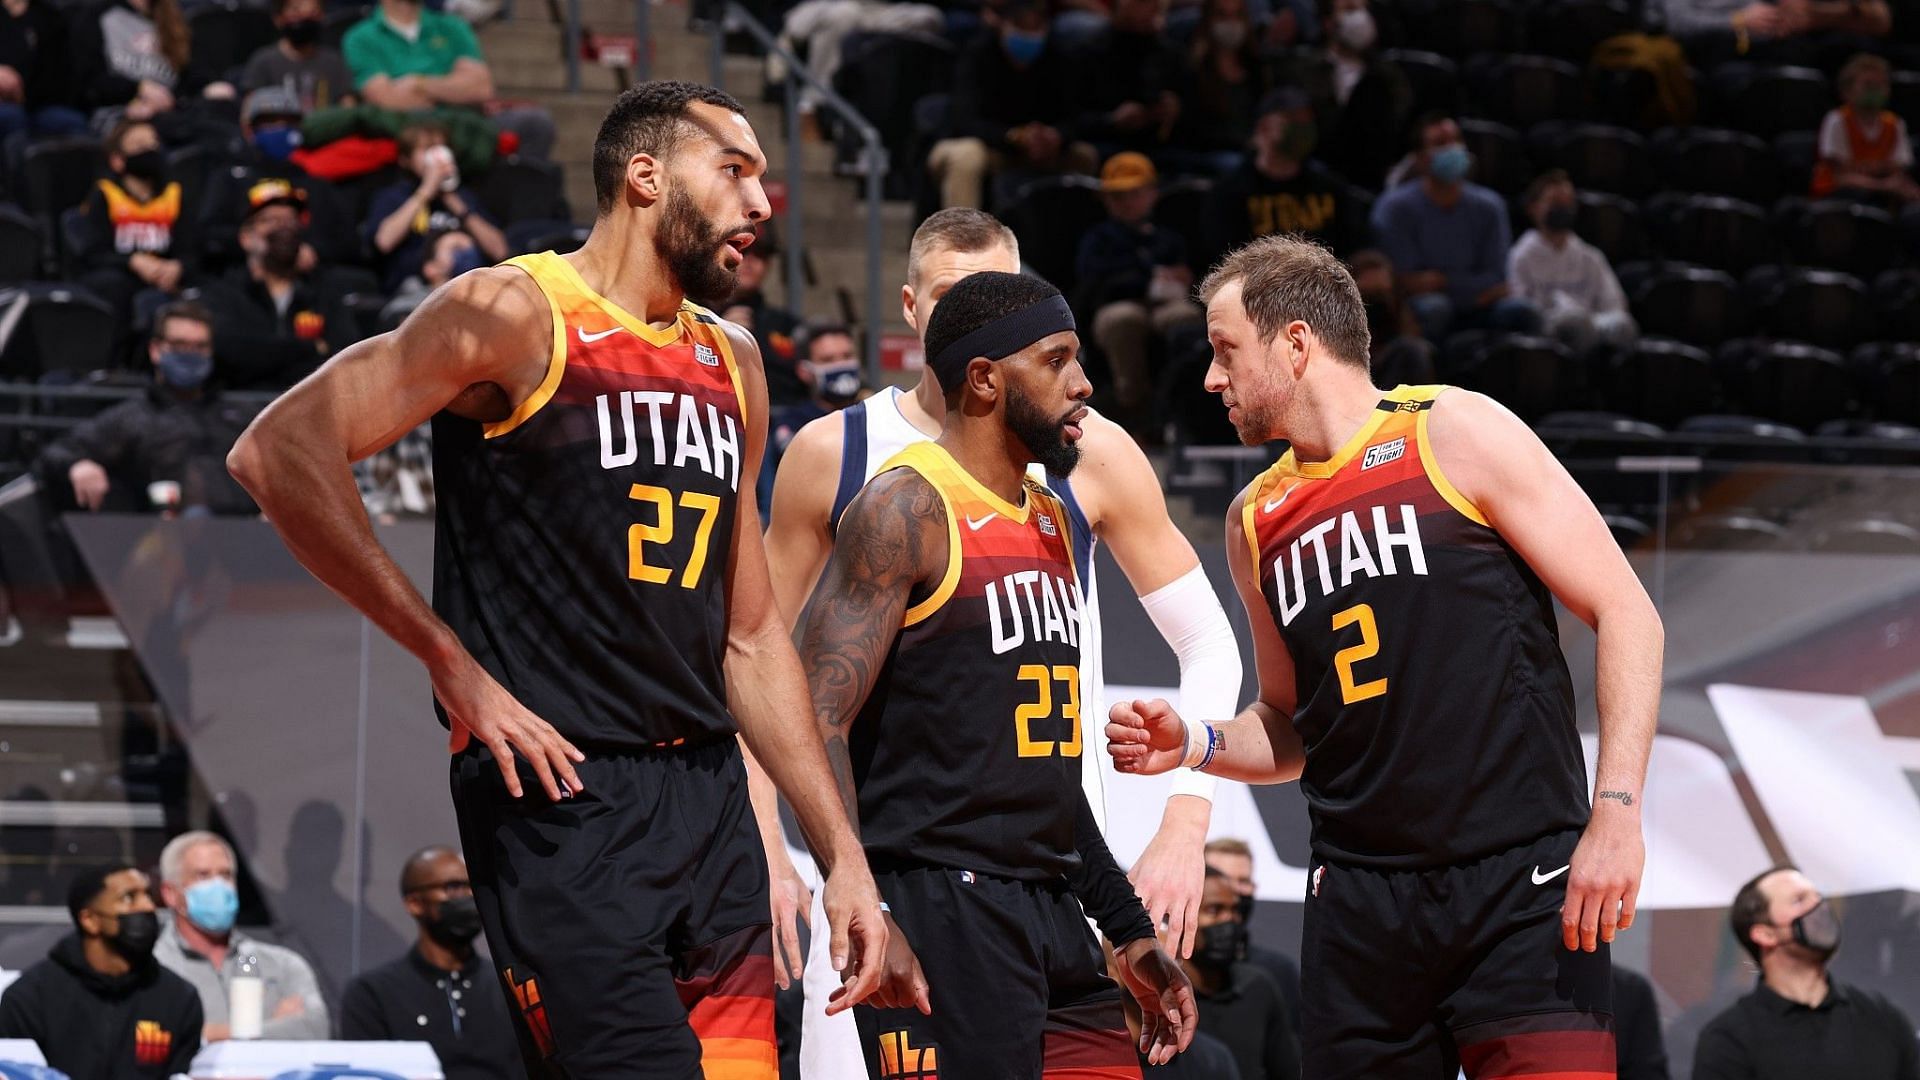 The Utah Jazz are rolling over opponents with an almost unstoppable offense. [Photo: CGTN]